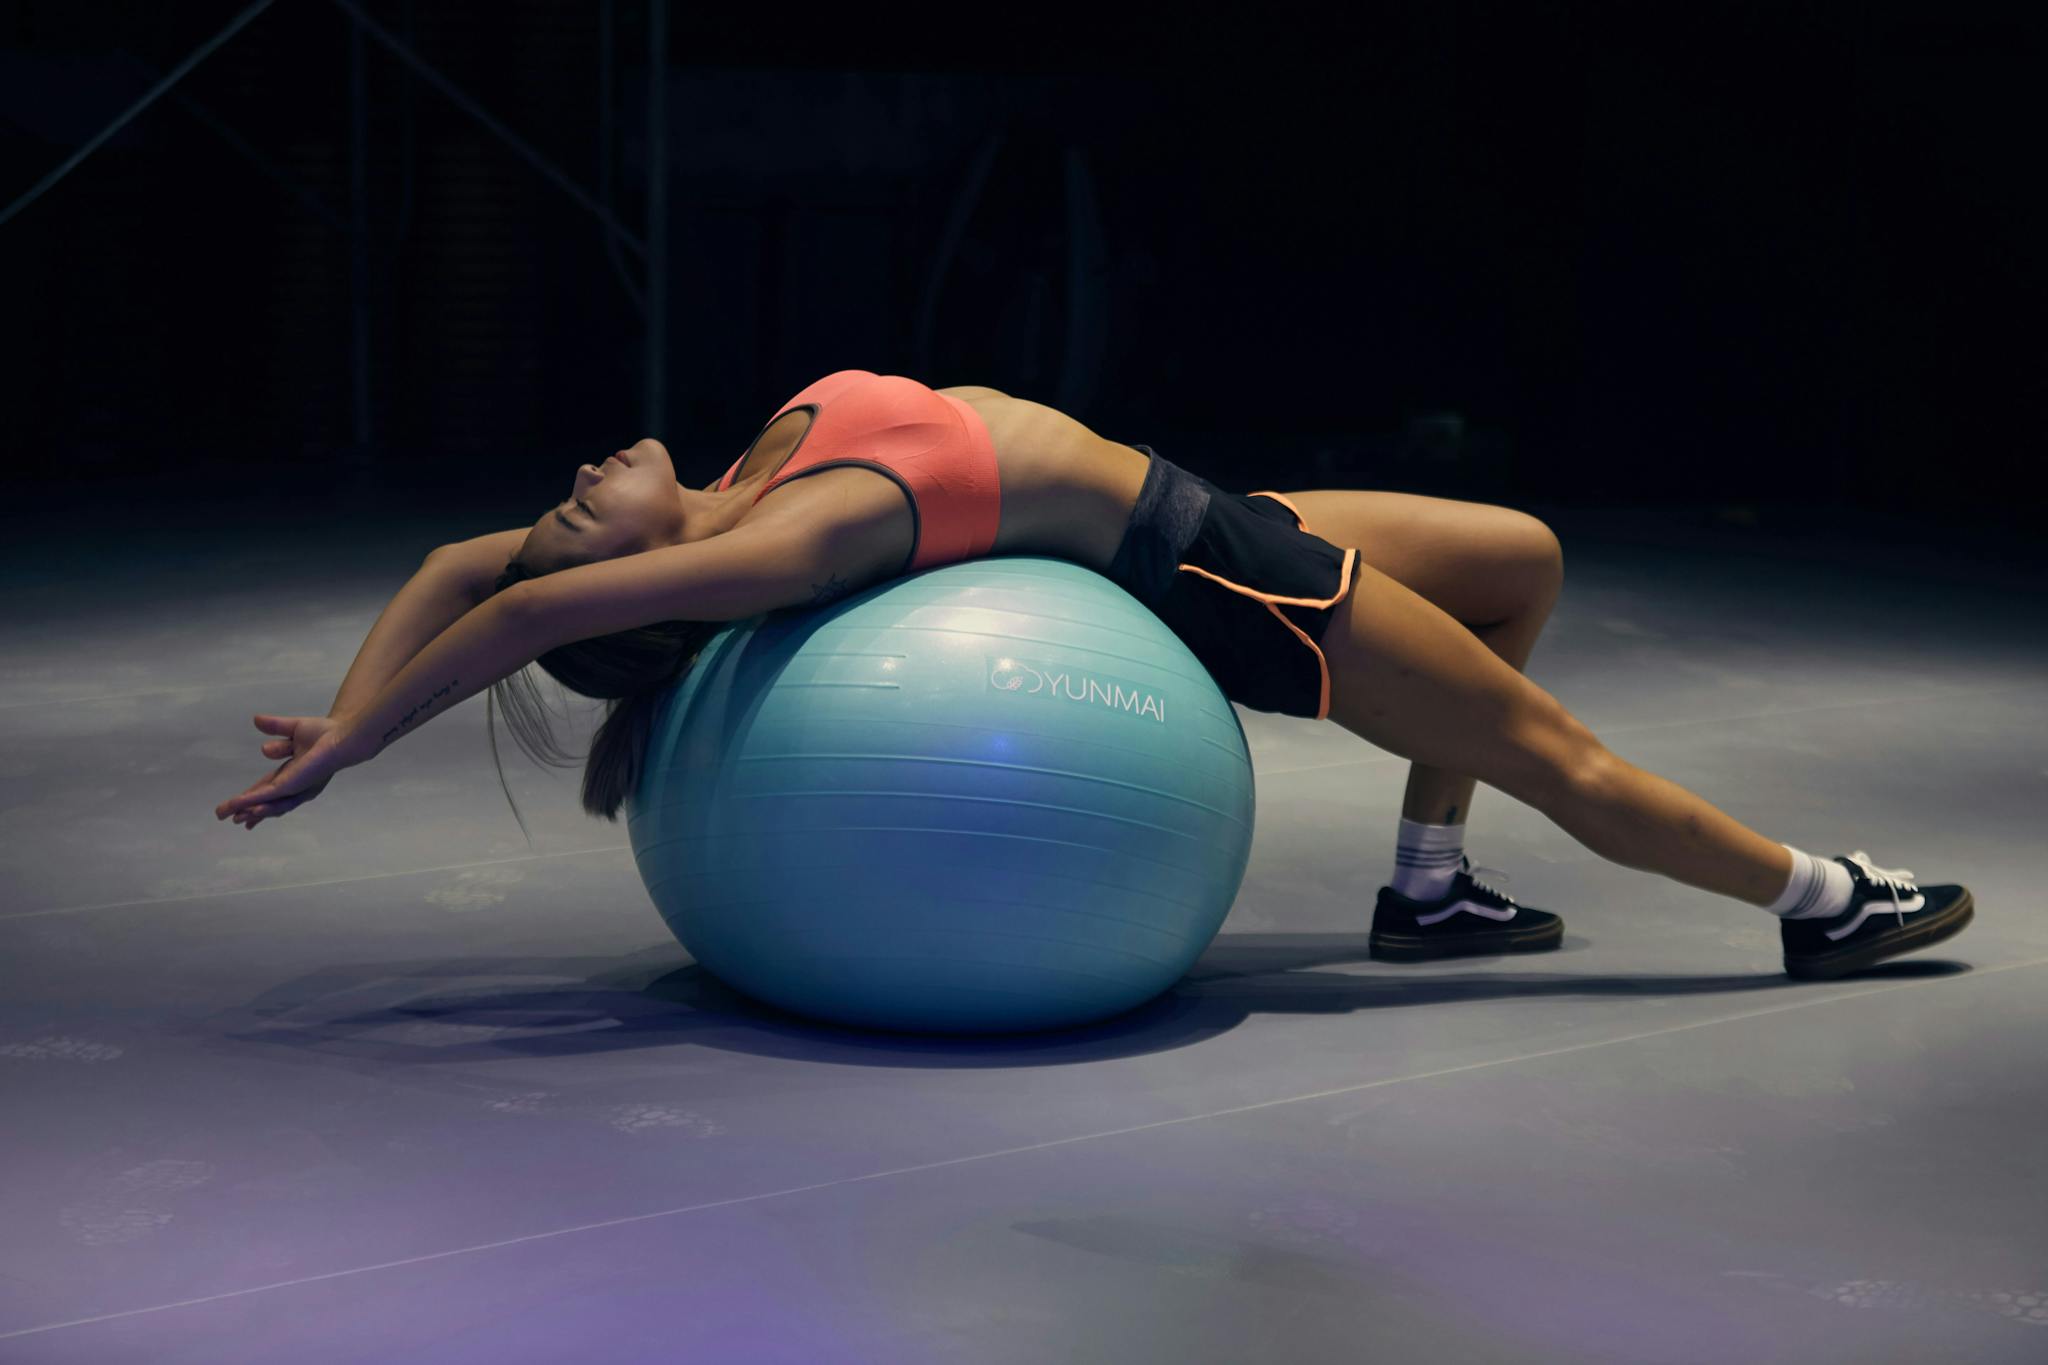 woman-doing-a-back-extension-exercise-on-a-fitness-ball